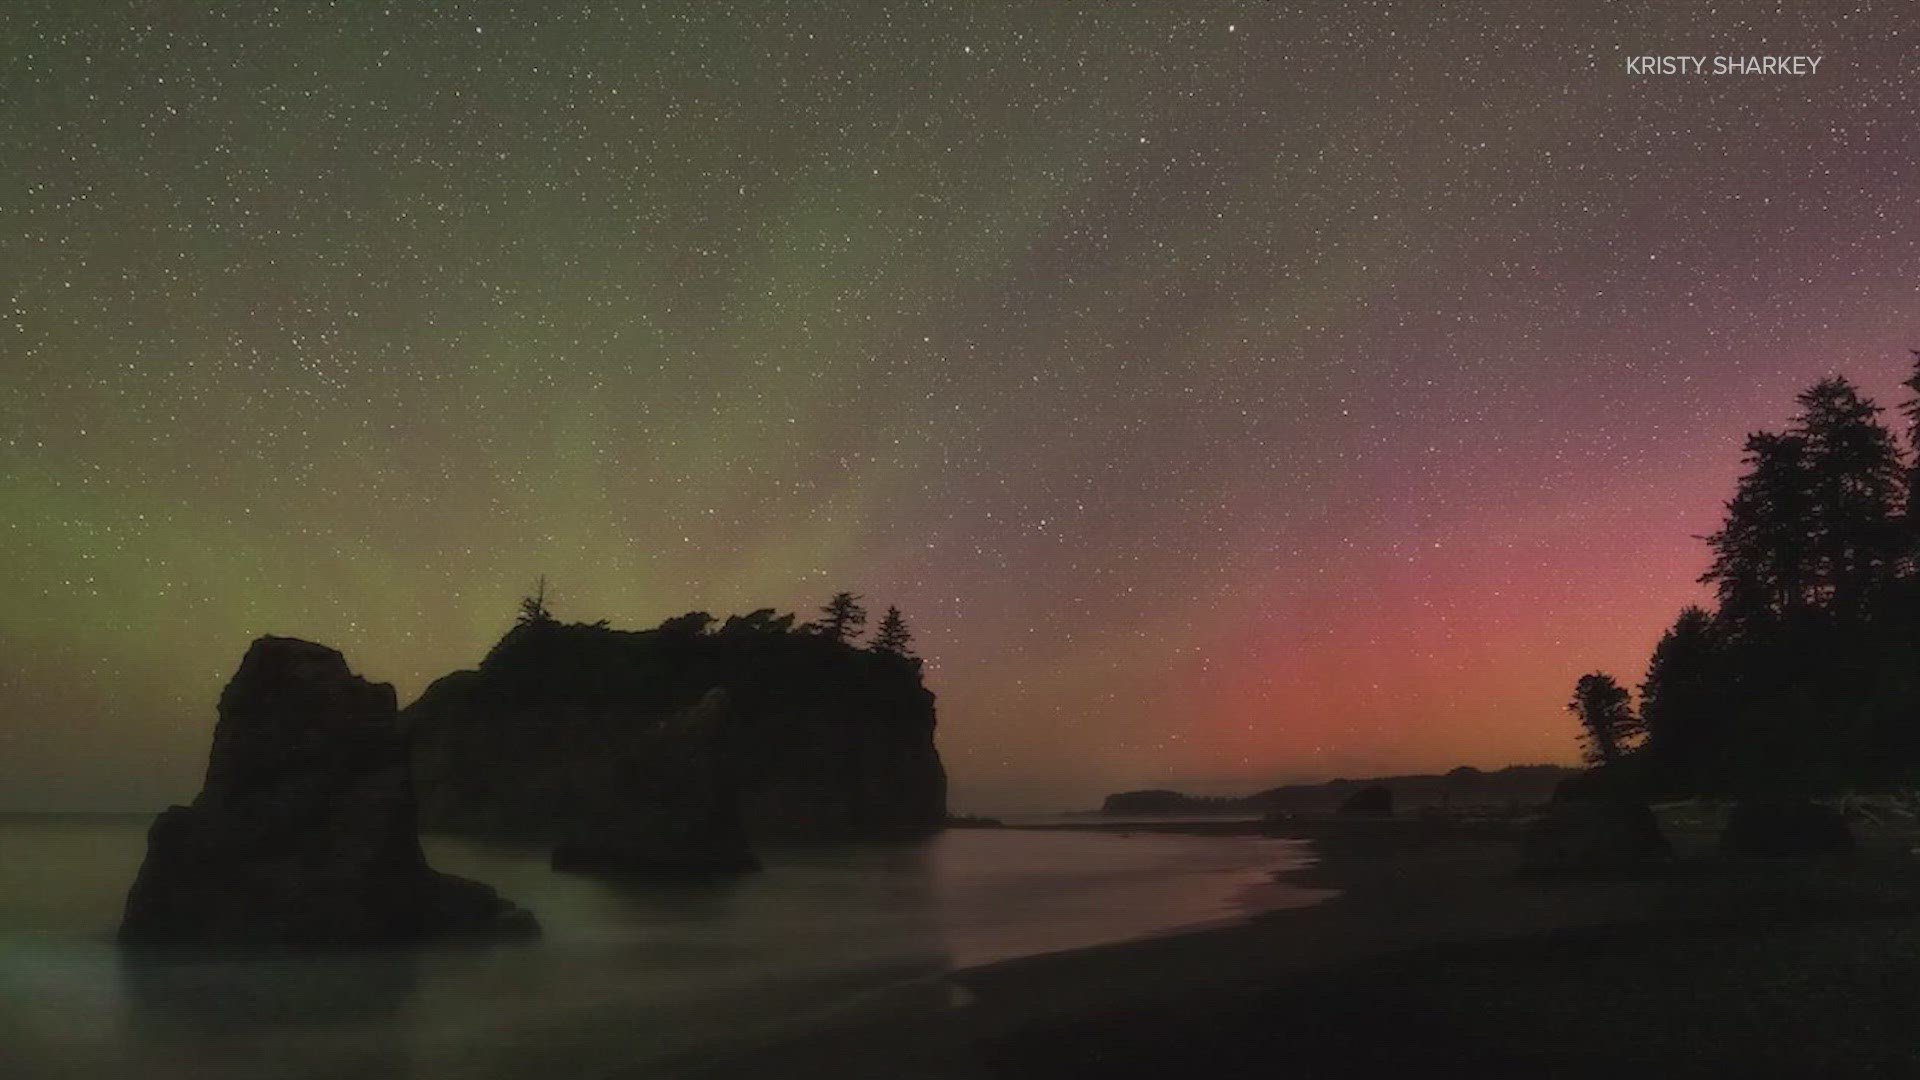 The late arriving Solar Storm will arrive at earth Friday evening. This may give part of western Washington the chance to see the aurora borealis.